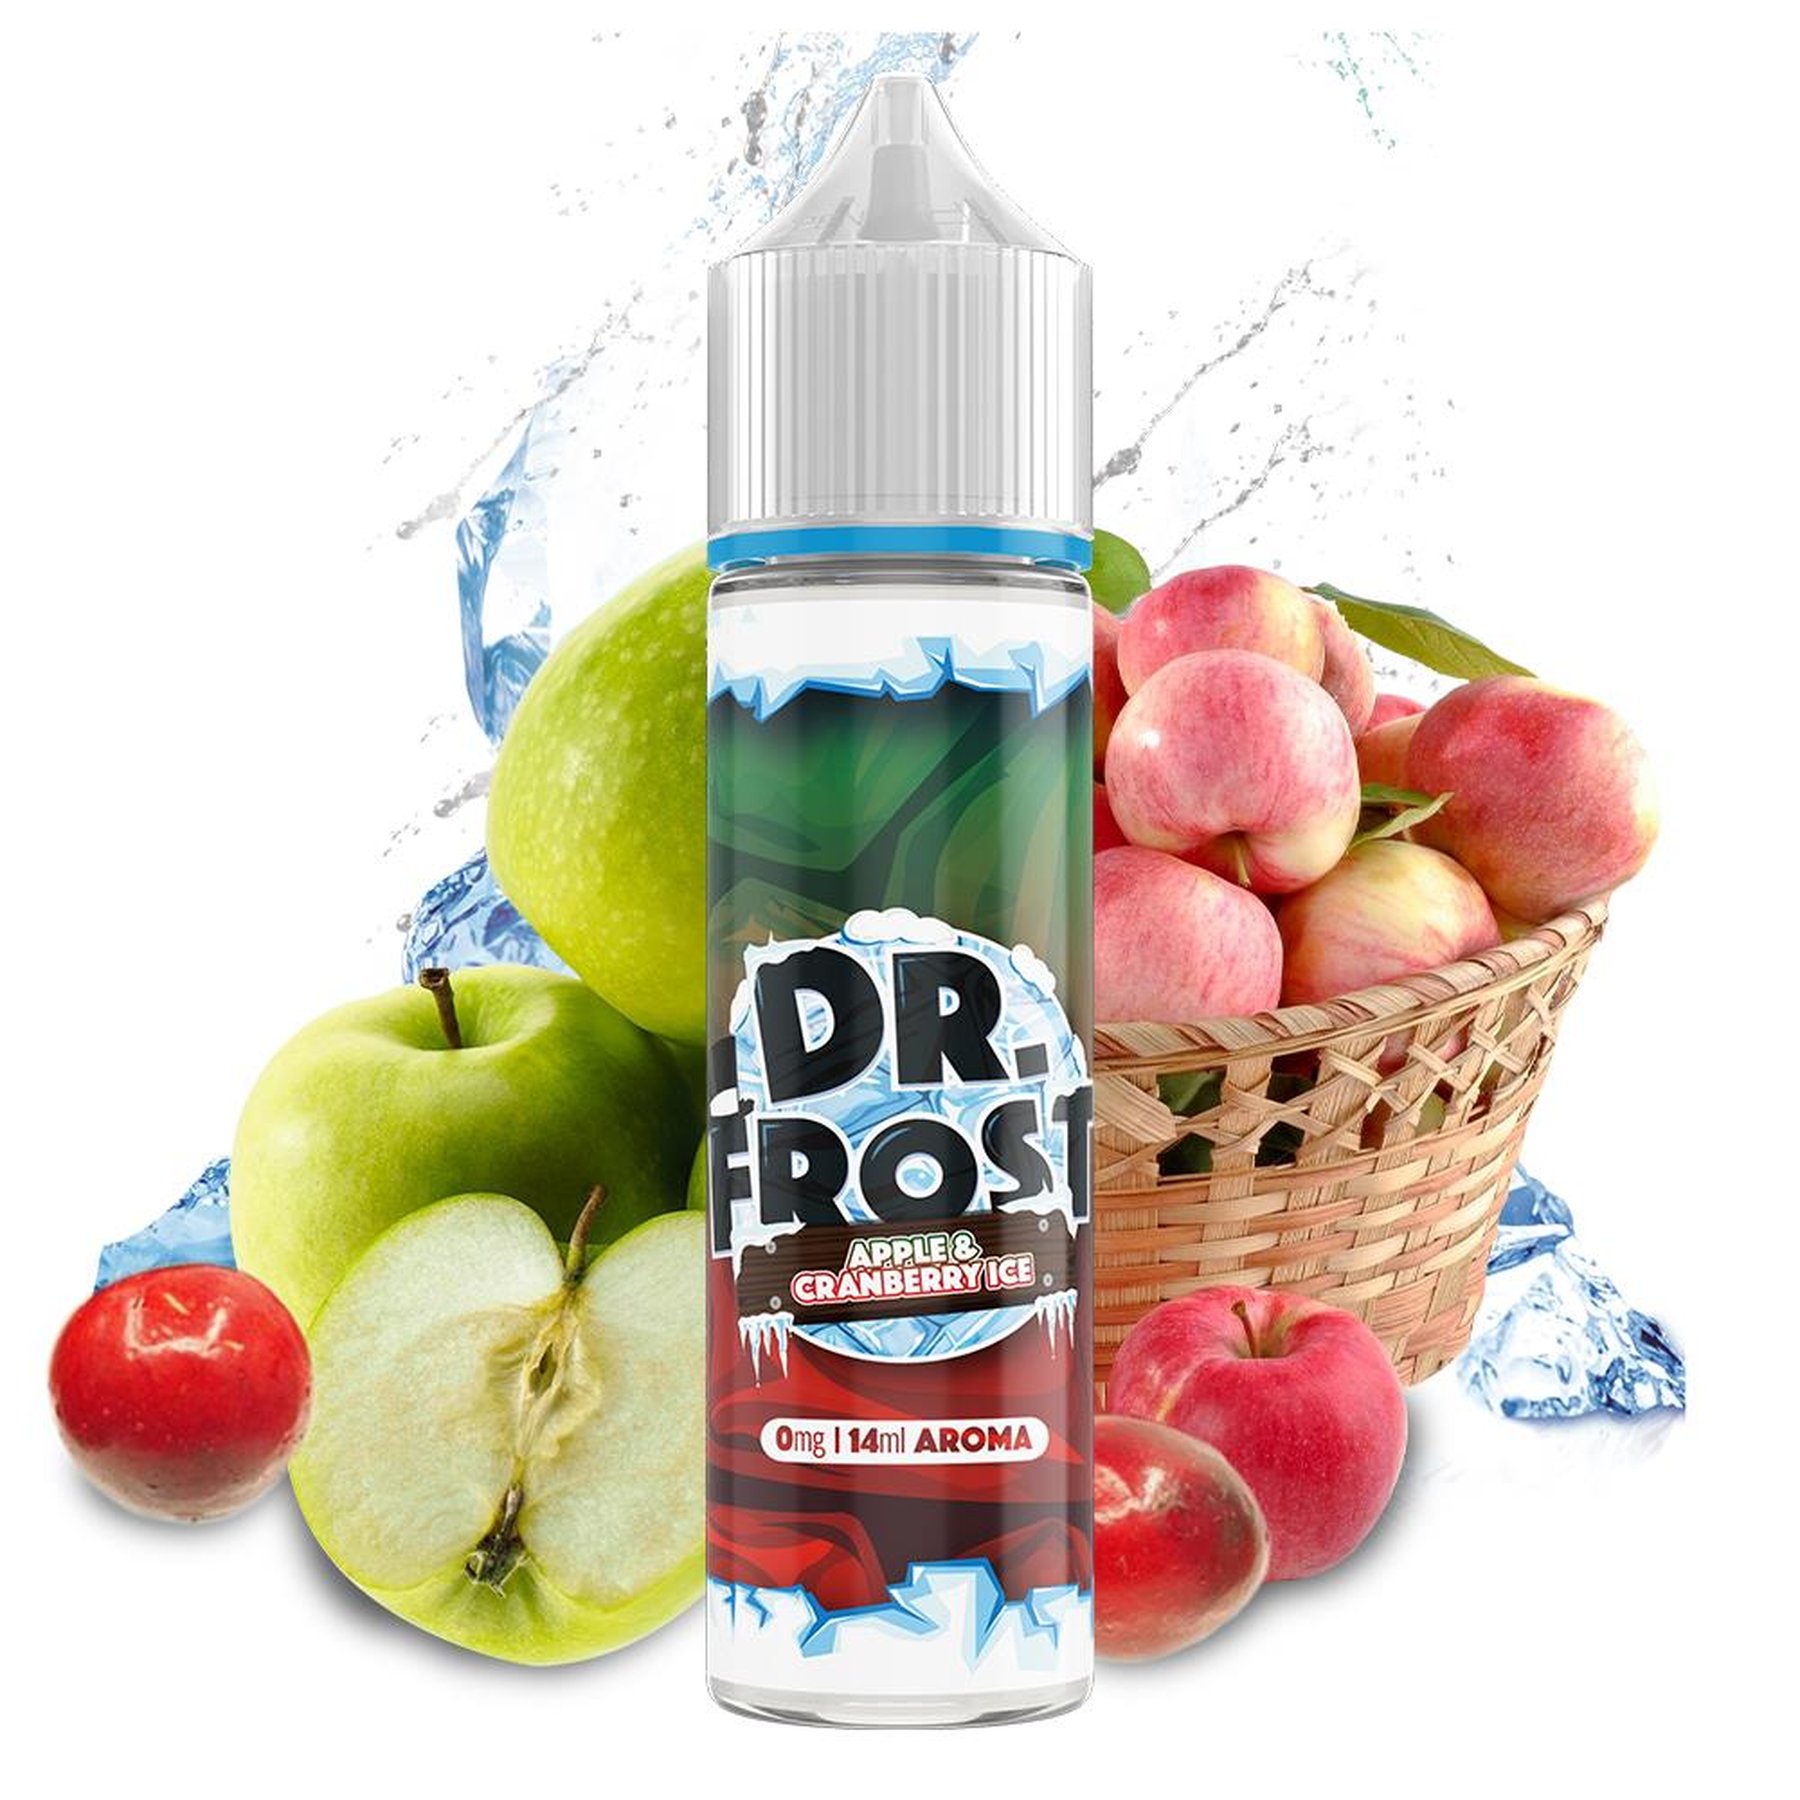 Dr. Frost Apple Cranberry Ice Longfill 14ml